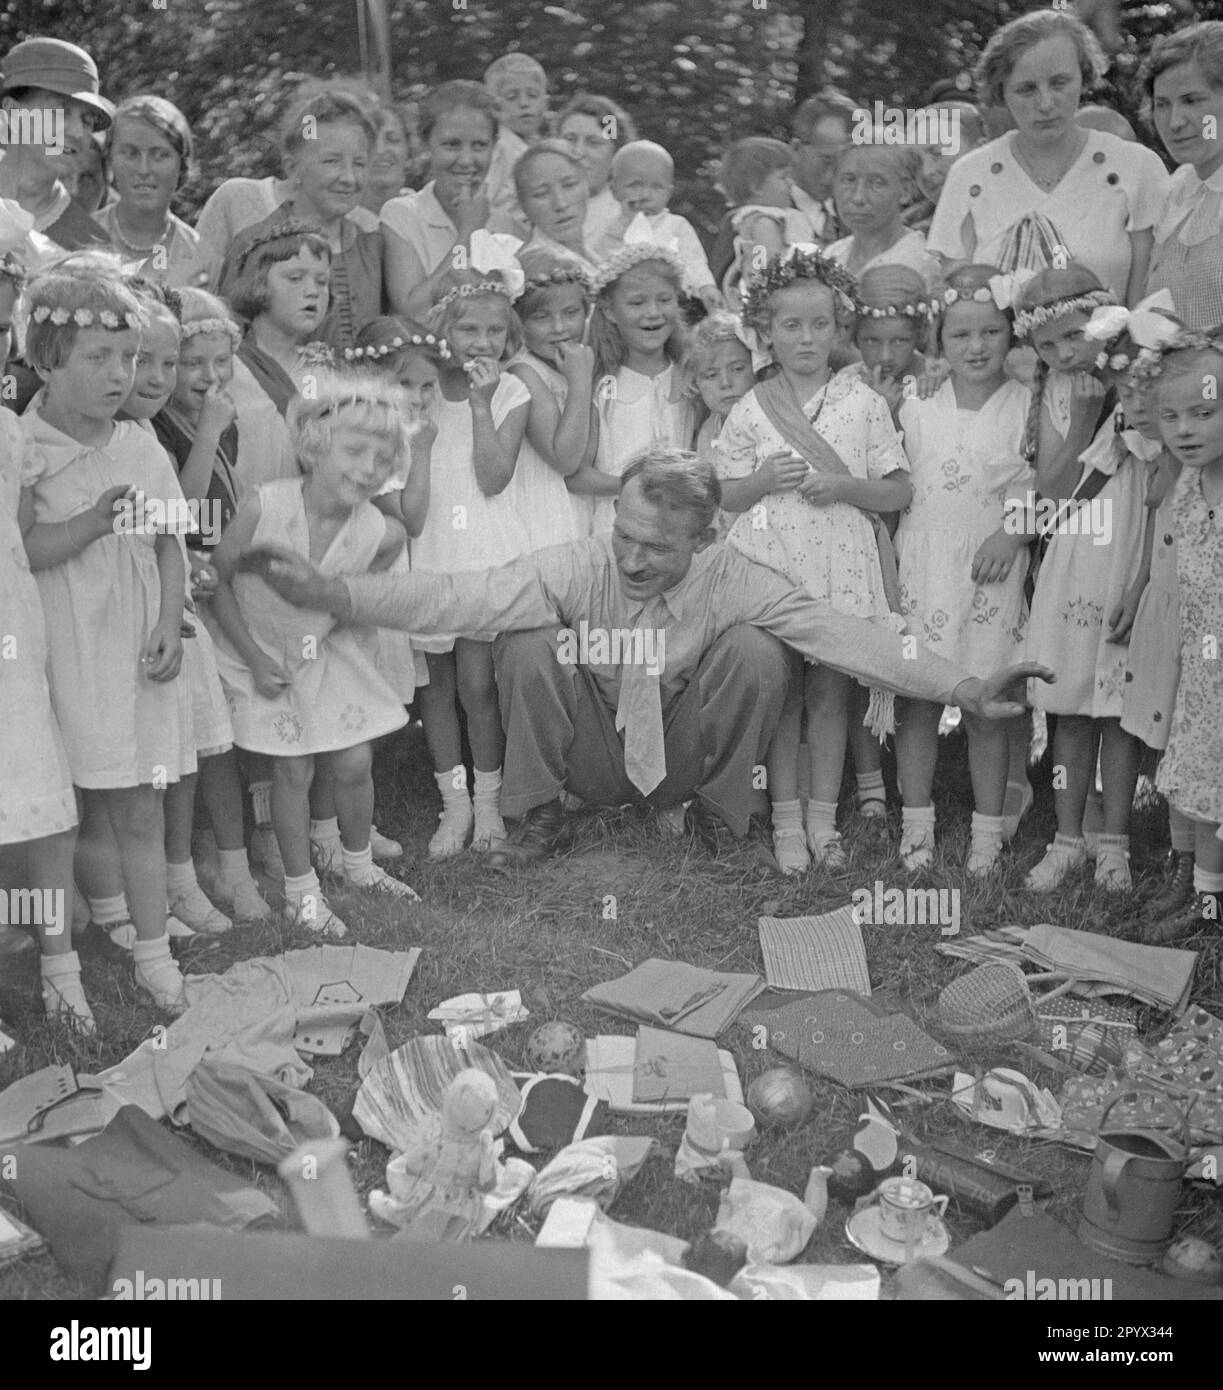 A man spreads his arms in front of many little girls dressed in white clothes, in front of him are various everyday objects on the ground, such as hats, cloths, jugs, dolls, baskets, etc. Stock Photo